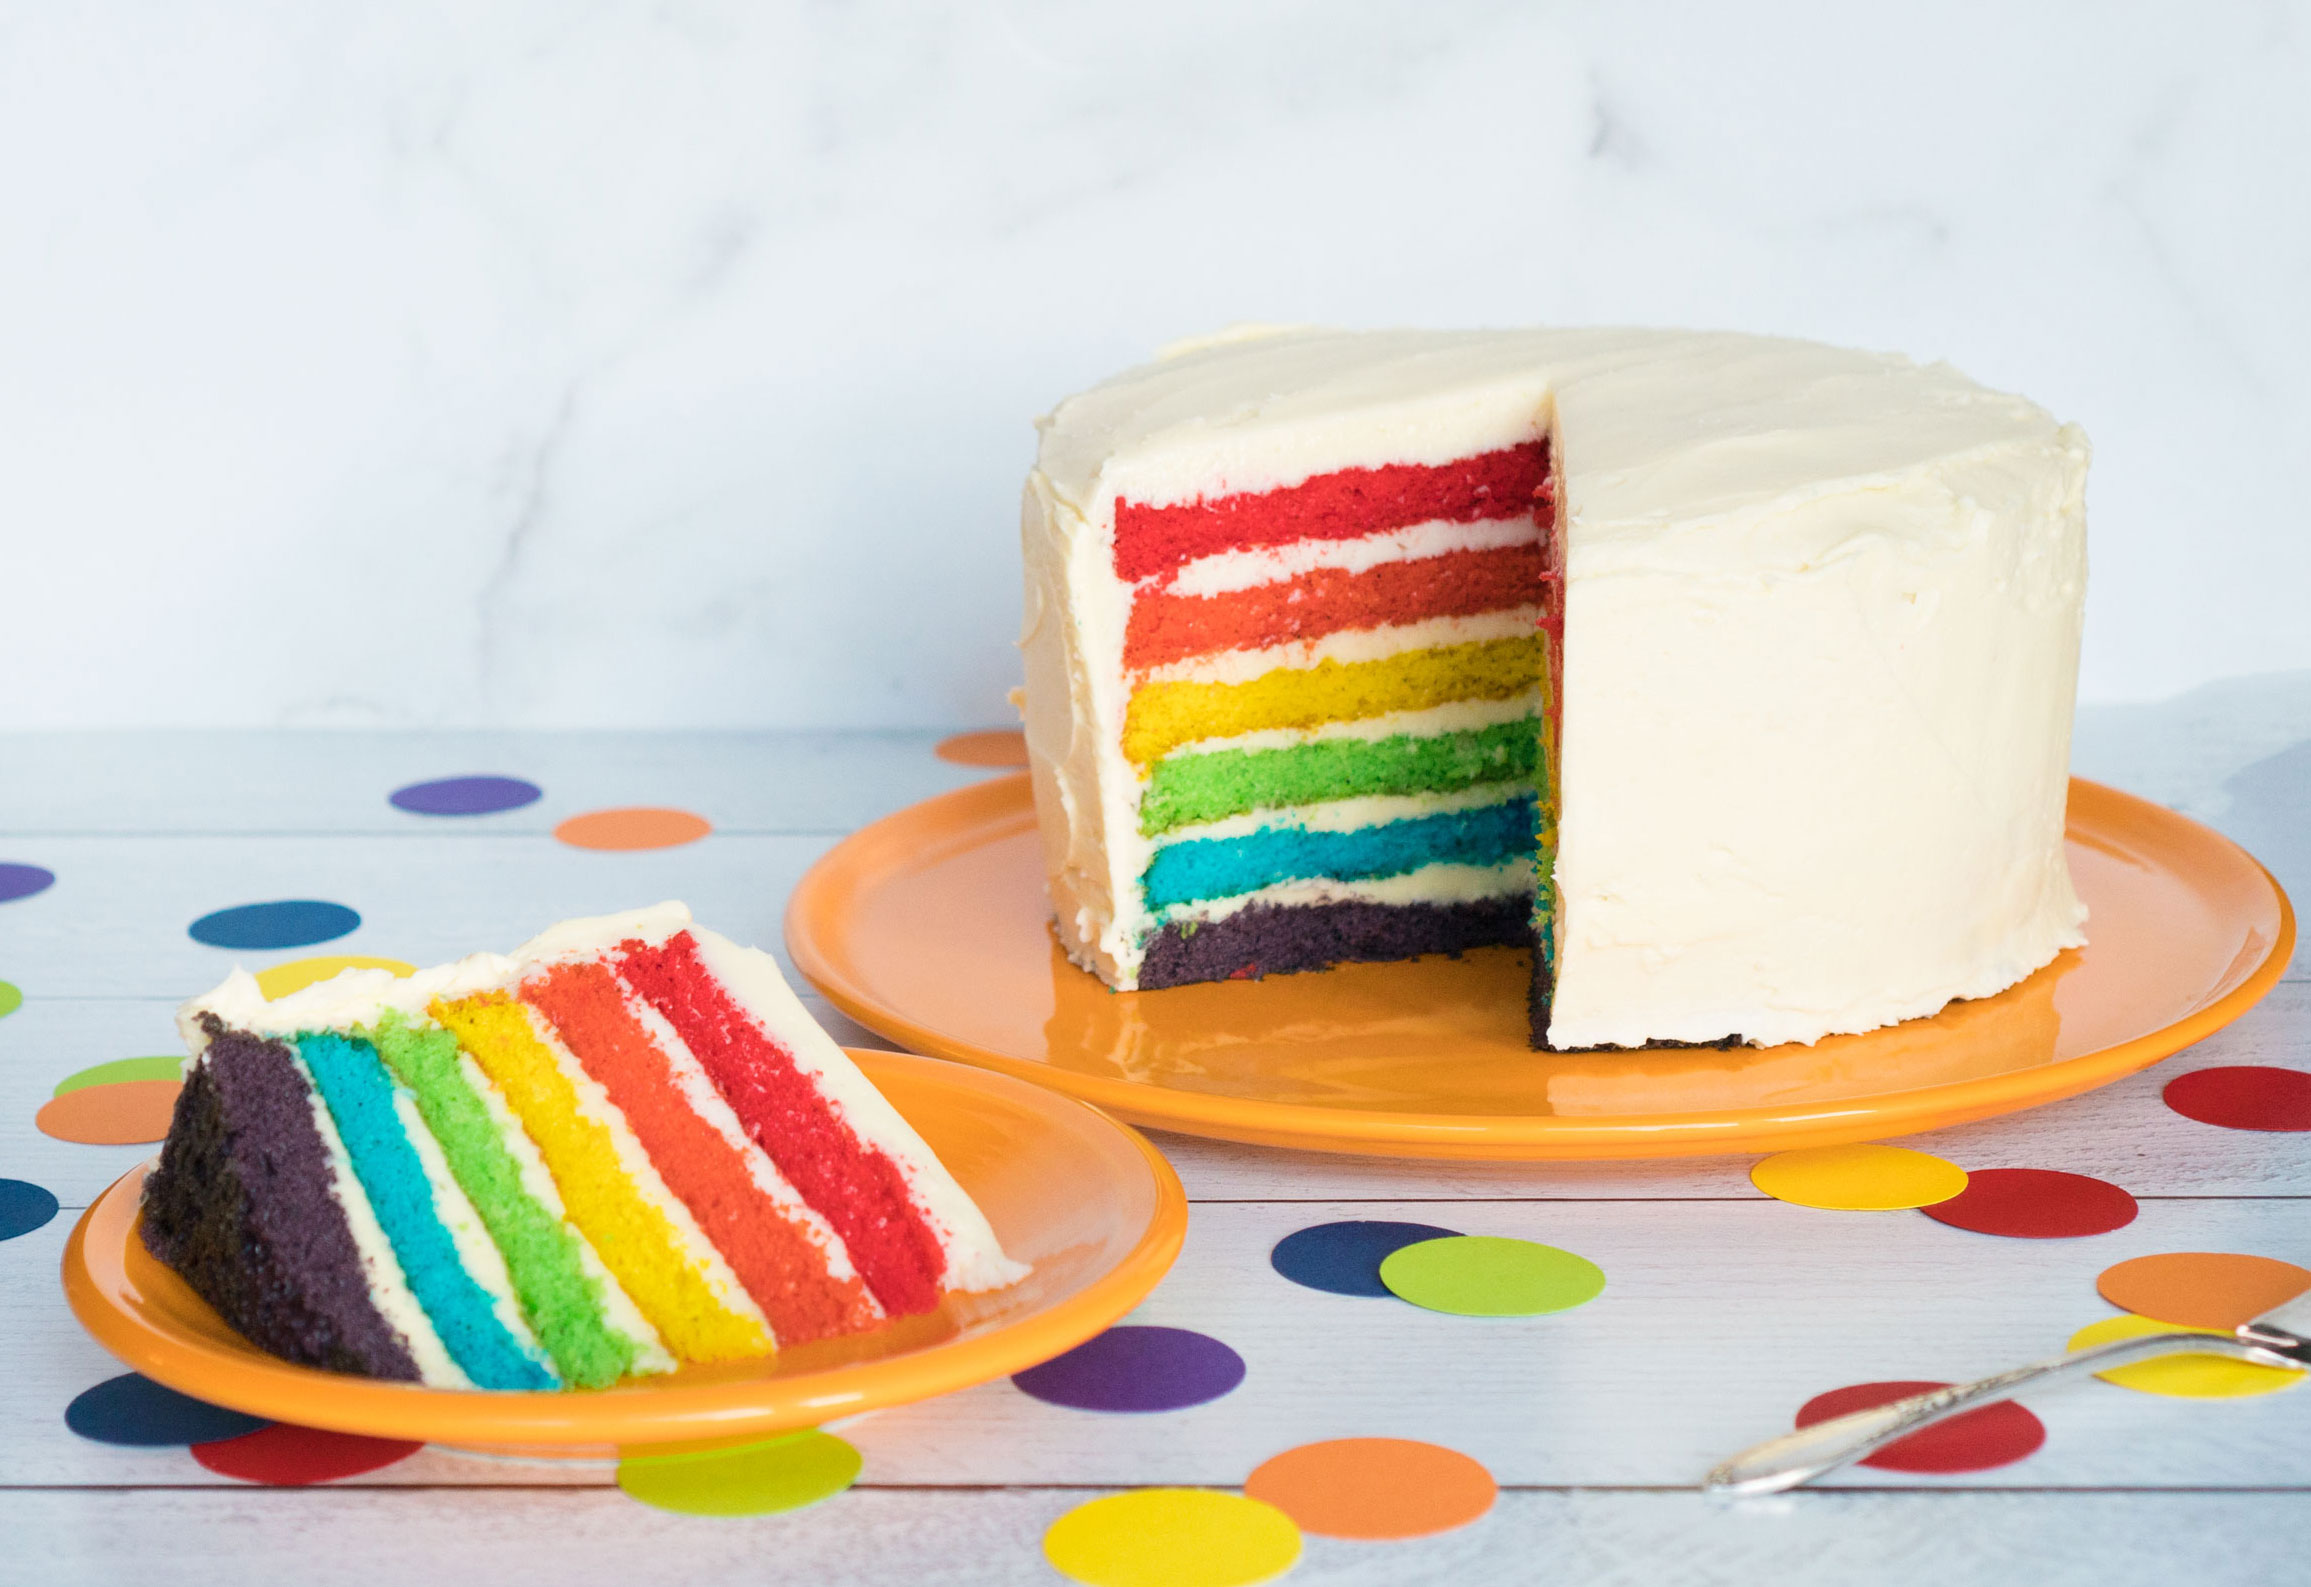 How to Ice a Rainbow Cake | LoveCrafts